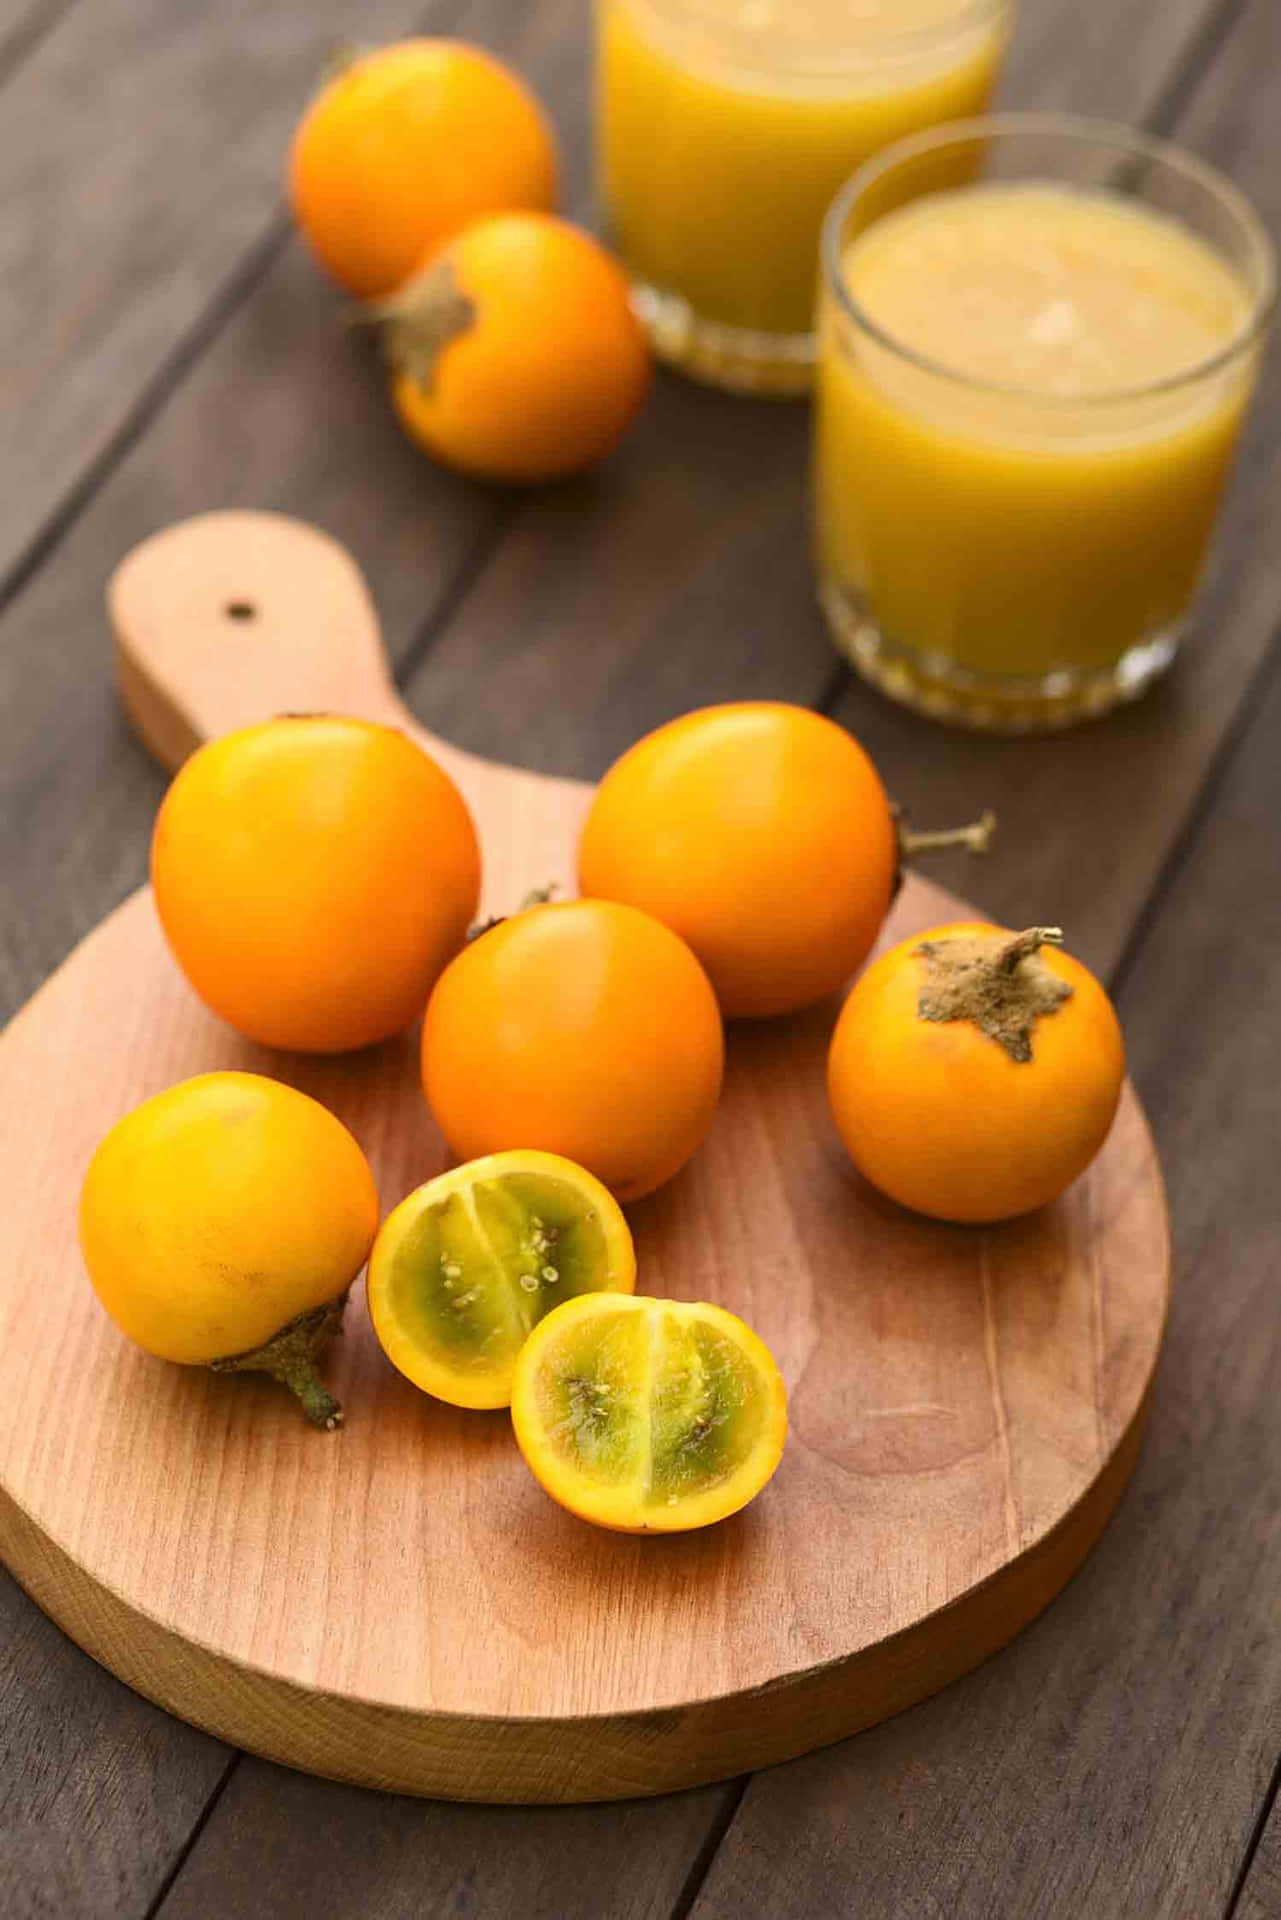 A Wooden Cutting Board With A Few Yellow Fruits On It